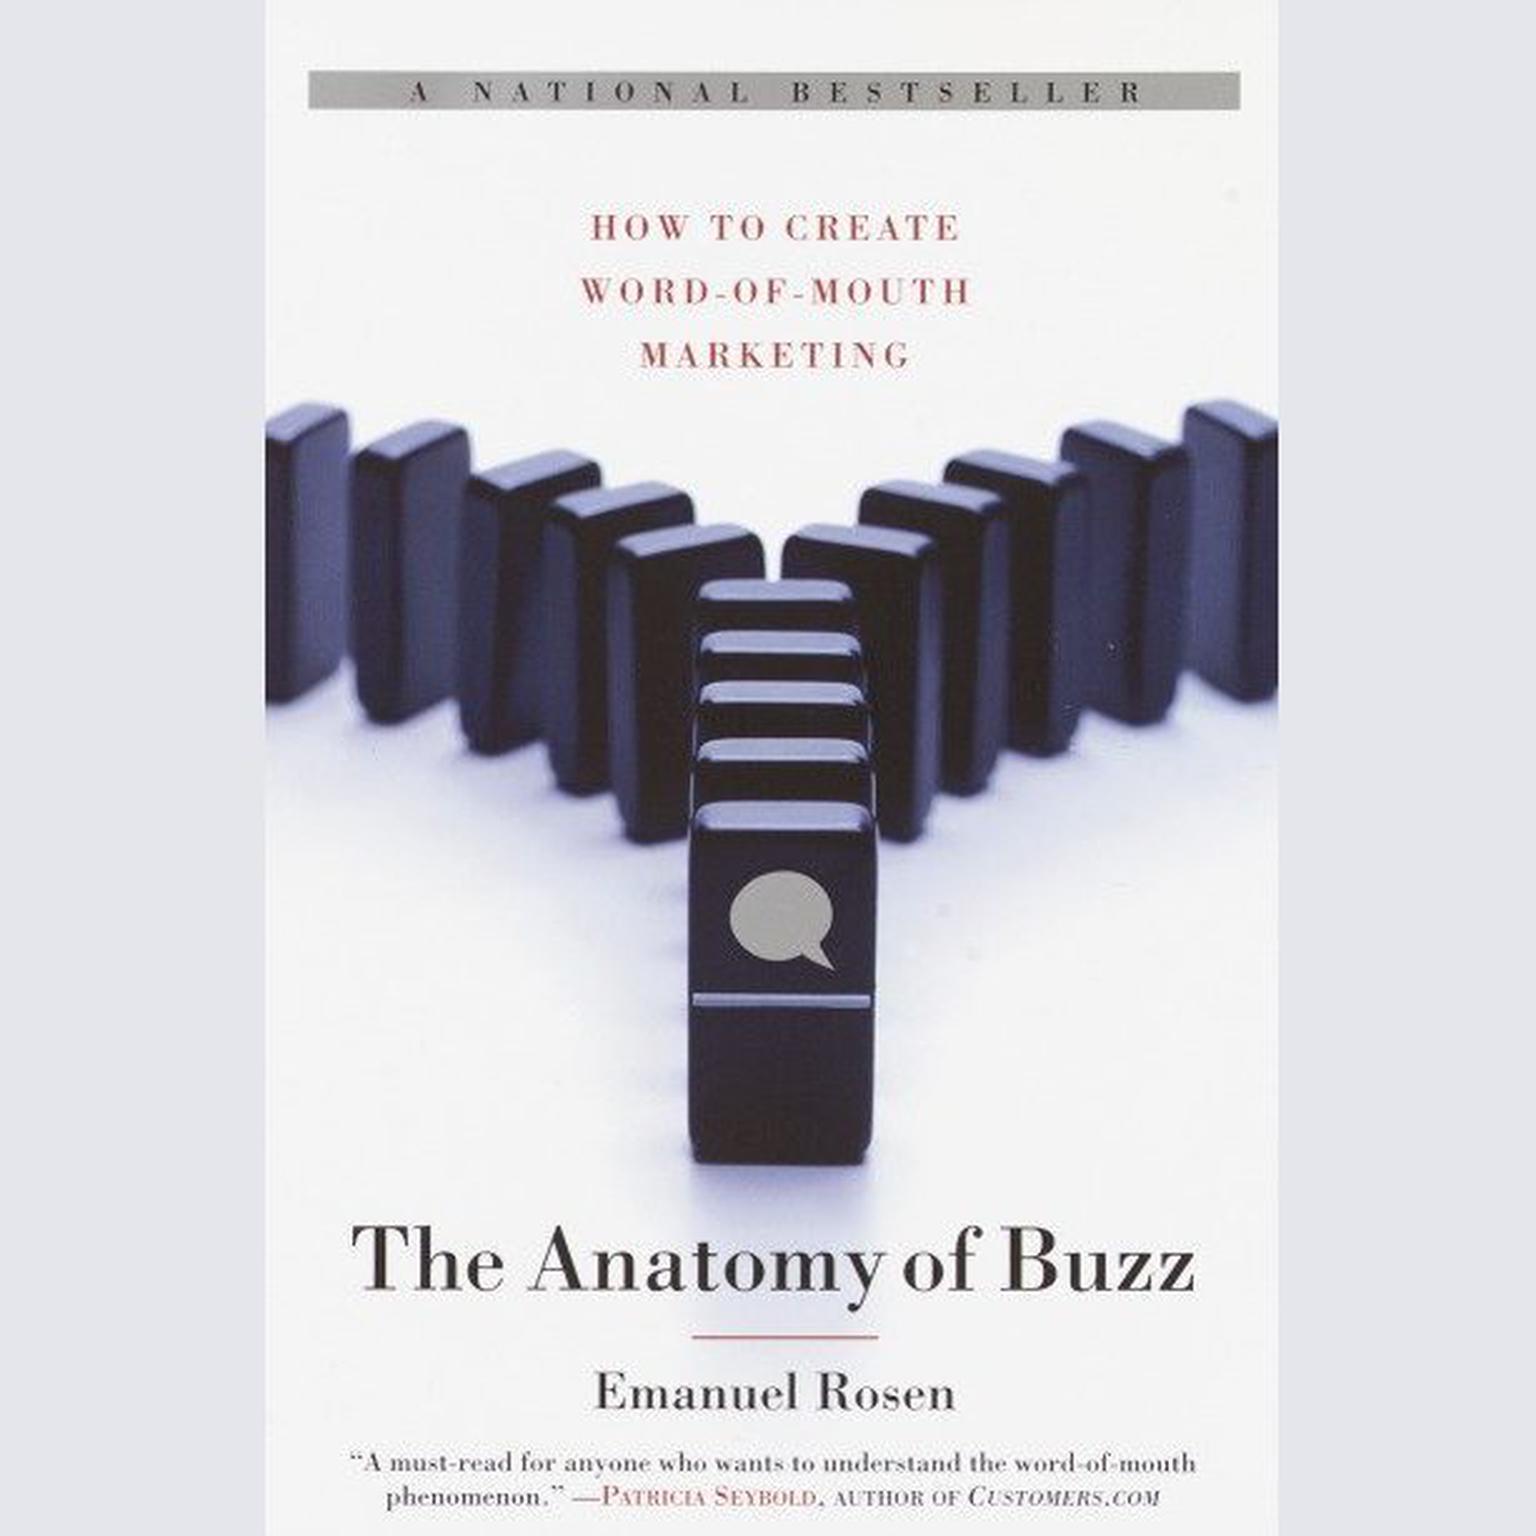 The Anatomy of Buzz (Abridged): How to Create Word of Mouth Marketing Audiobook, by Emanuel Rosen